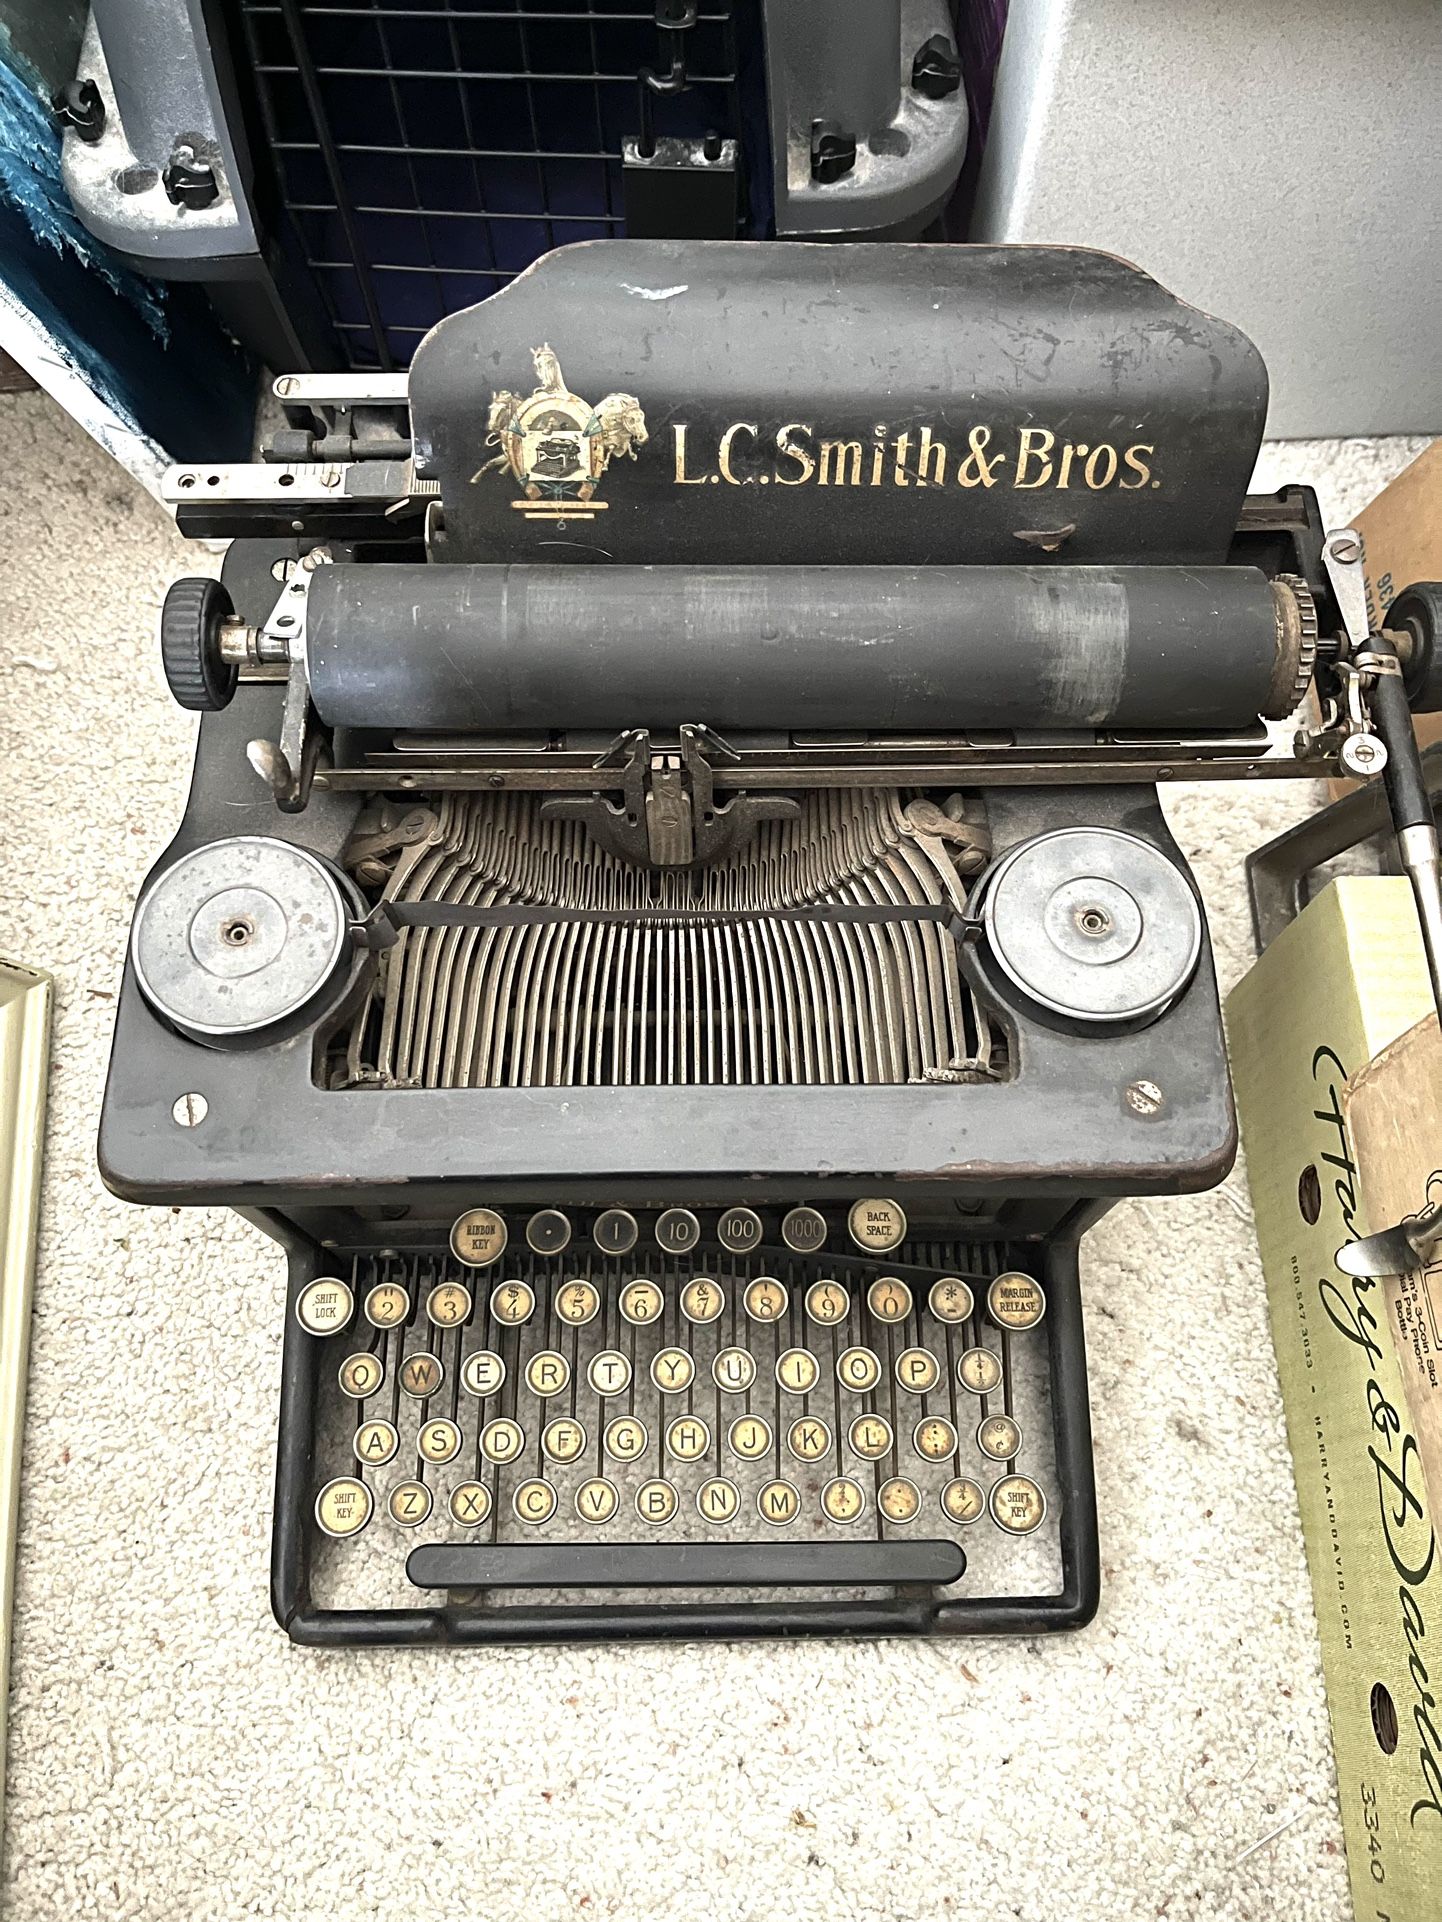 Antique 1920S LC. Smith & Bro. Typewriter. I am selling this as parts. It’s not functional.